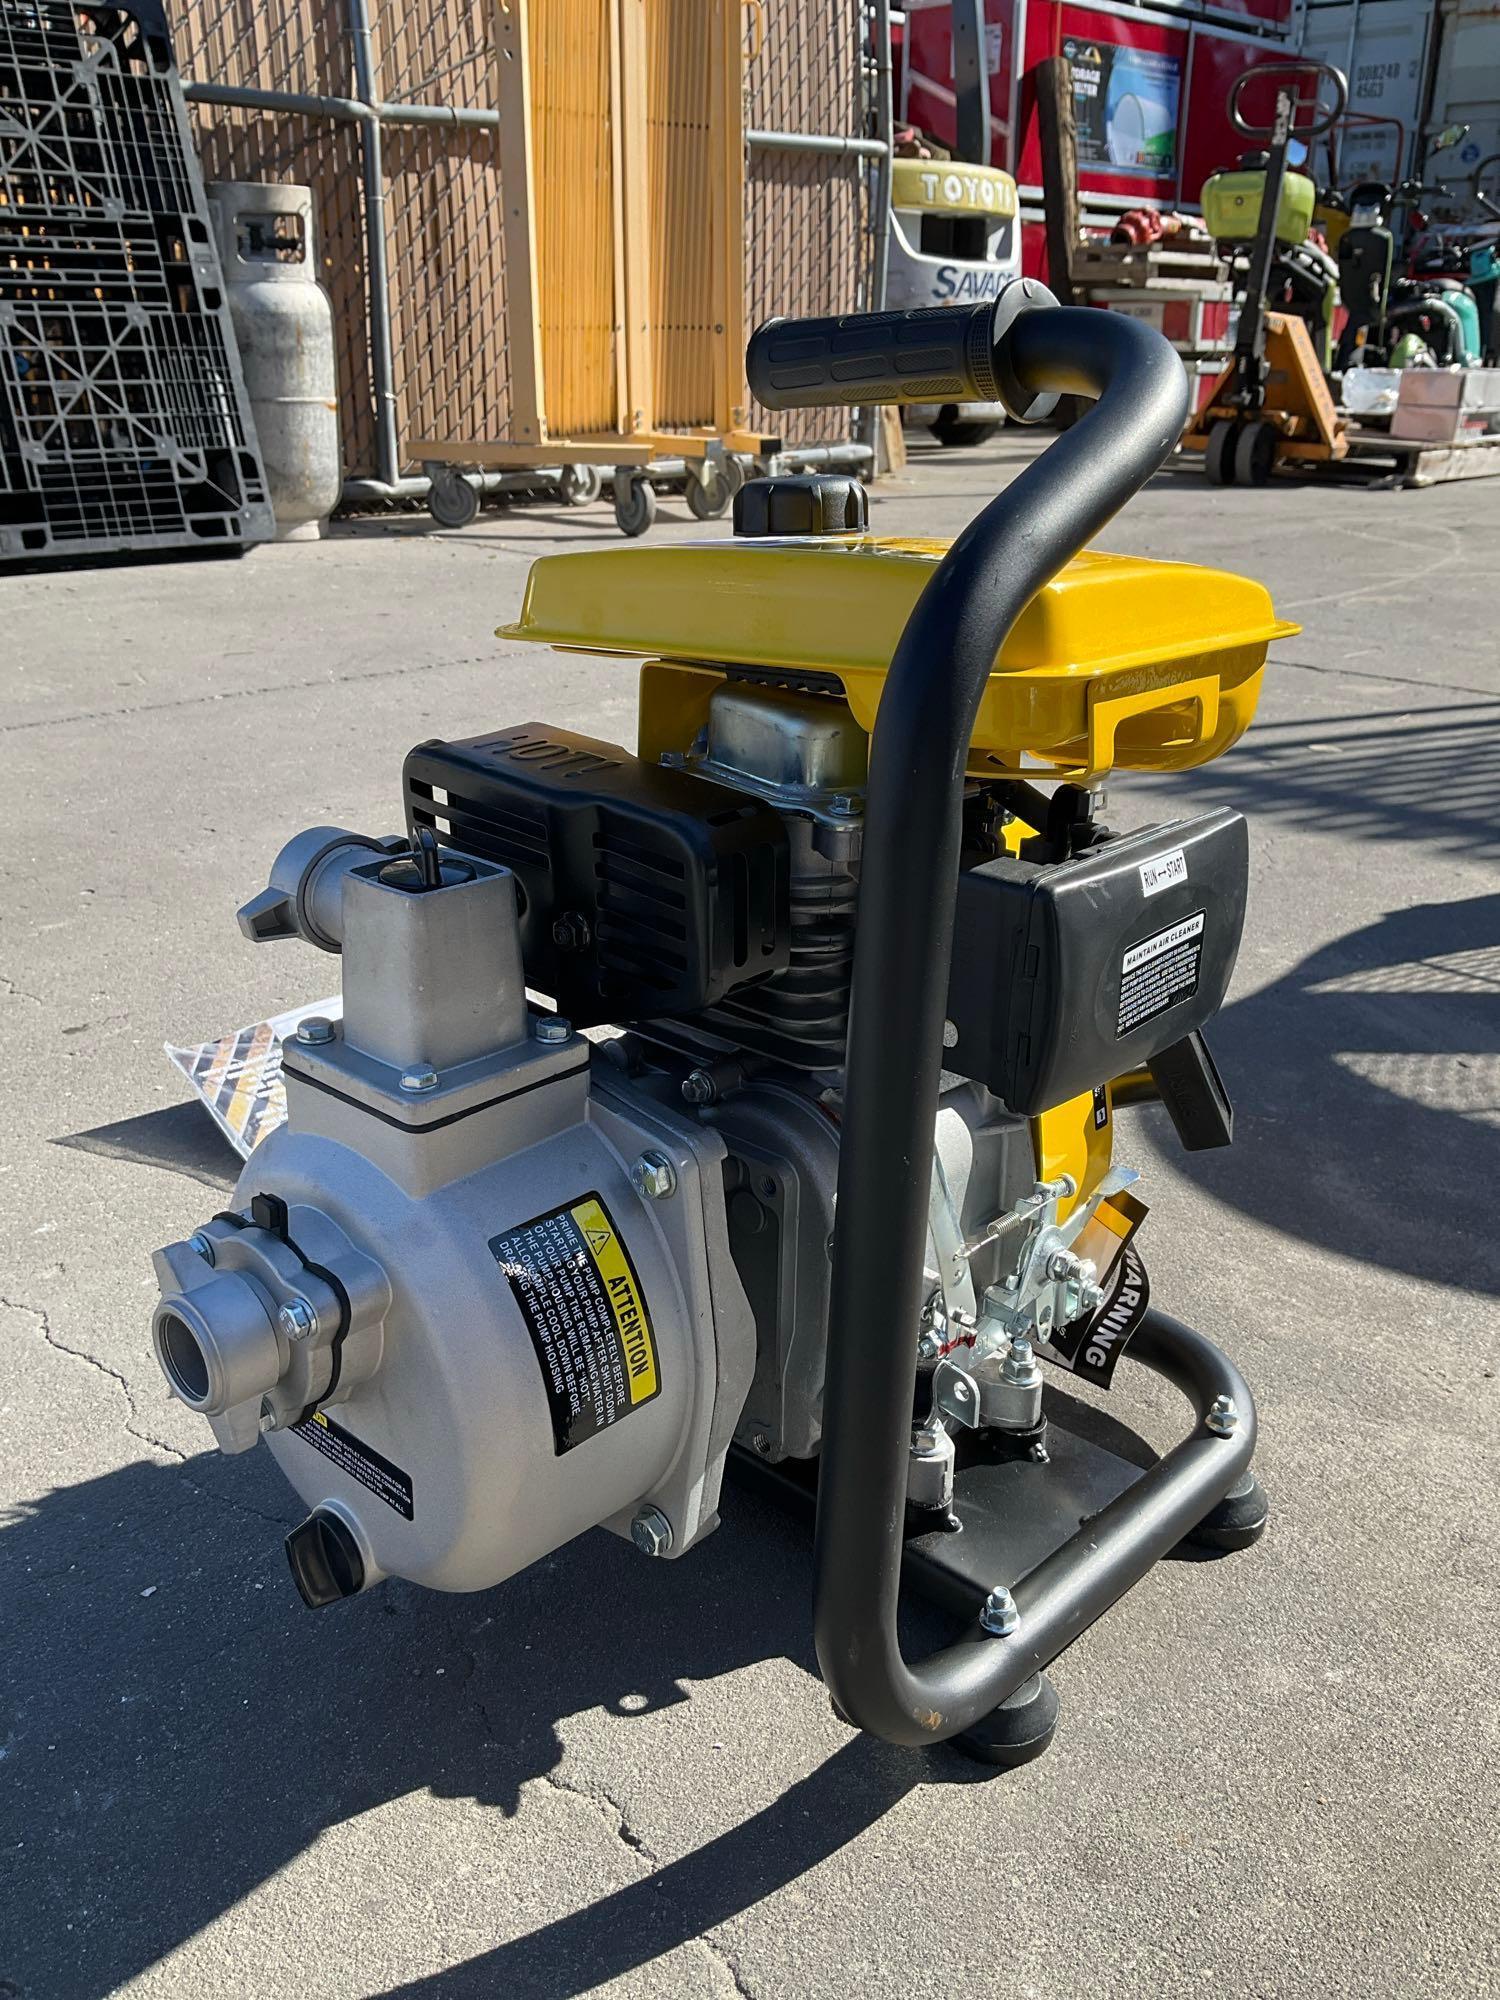 UNUSED LIFAN 1? DEWATERING PUMP MODEL ST1WP; APPROXIMATELY 3.0 HP